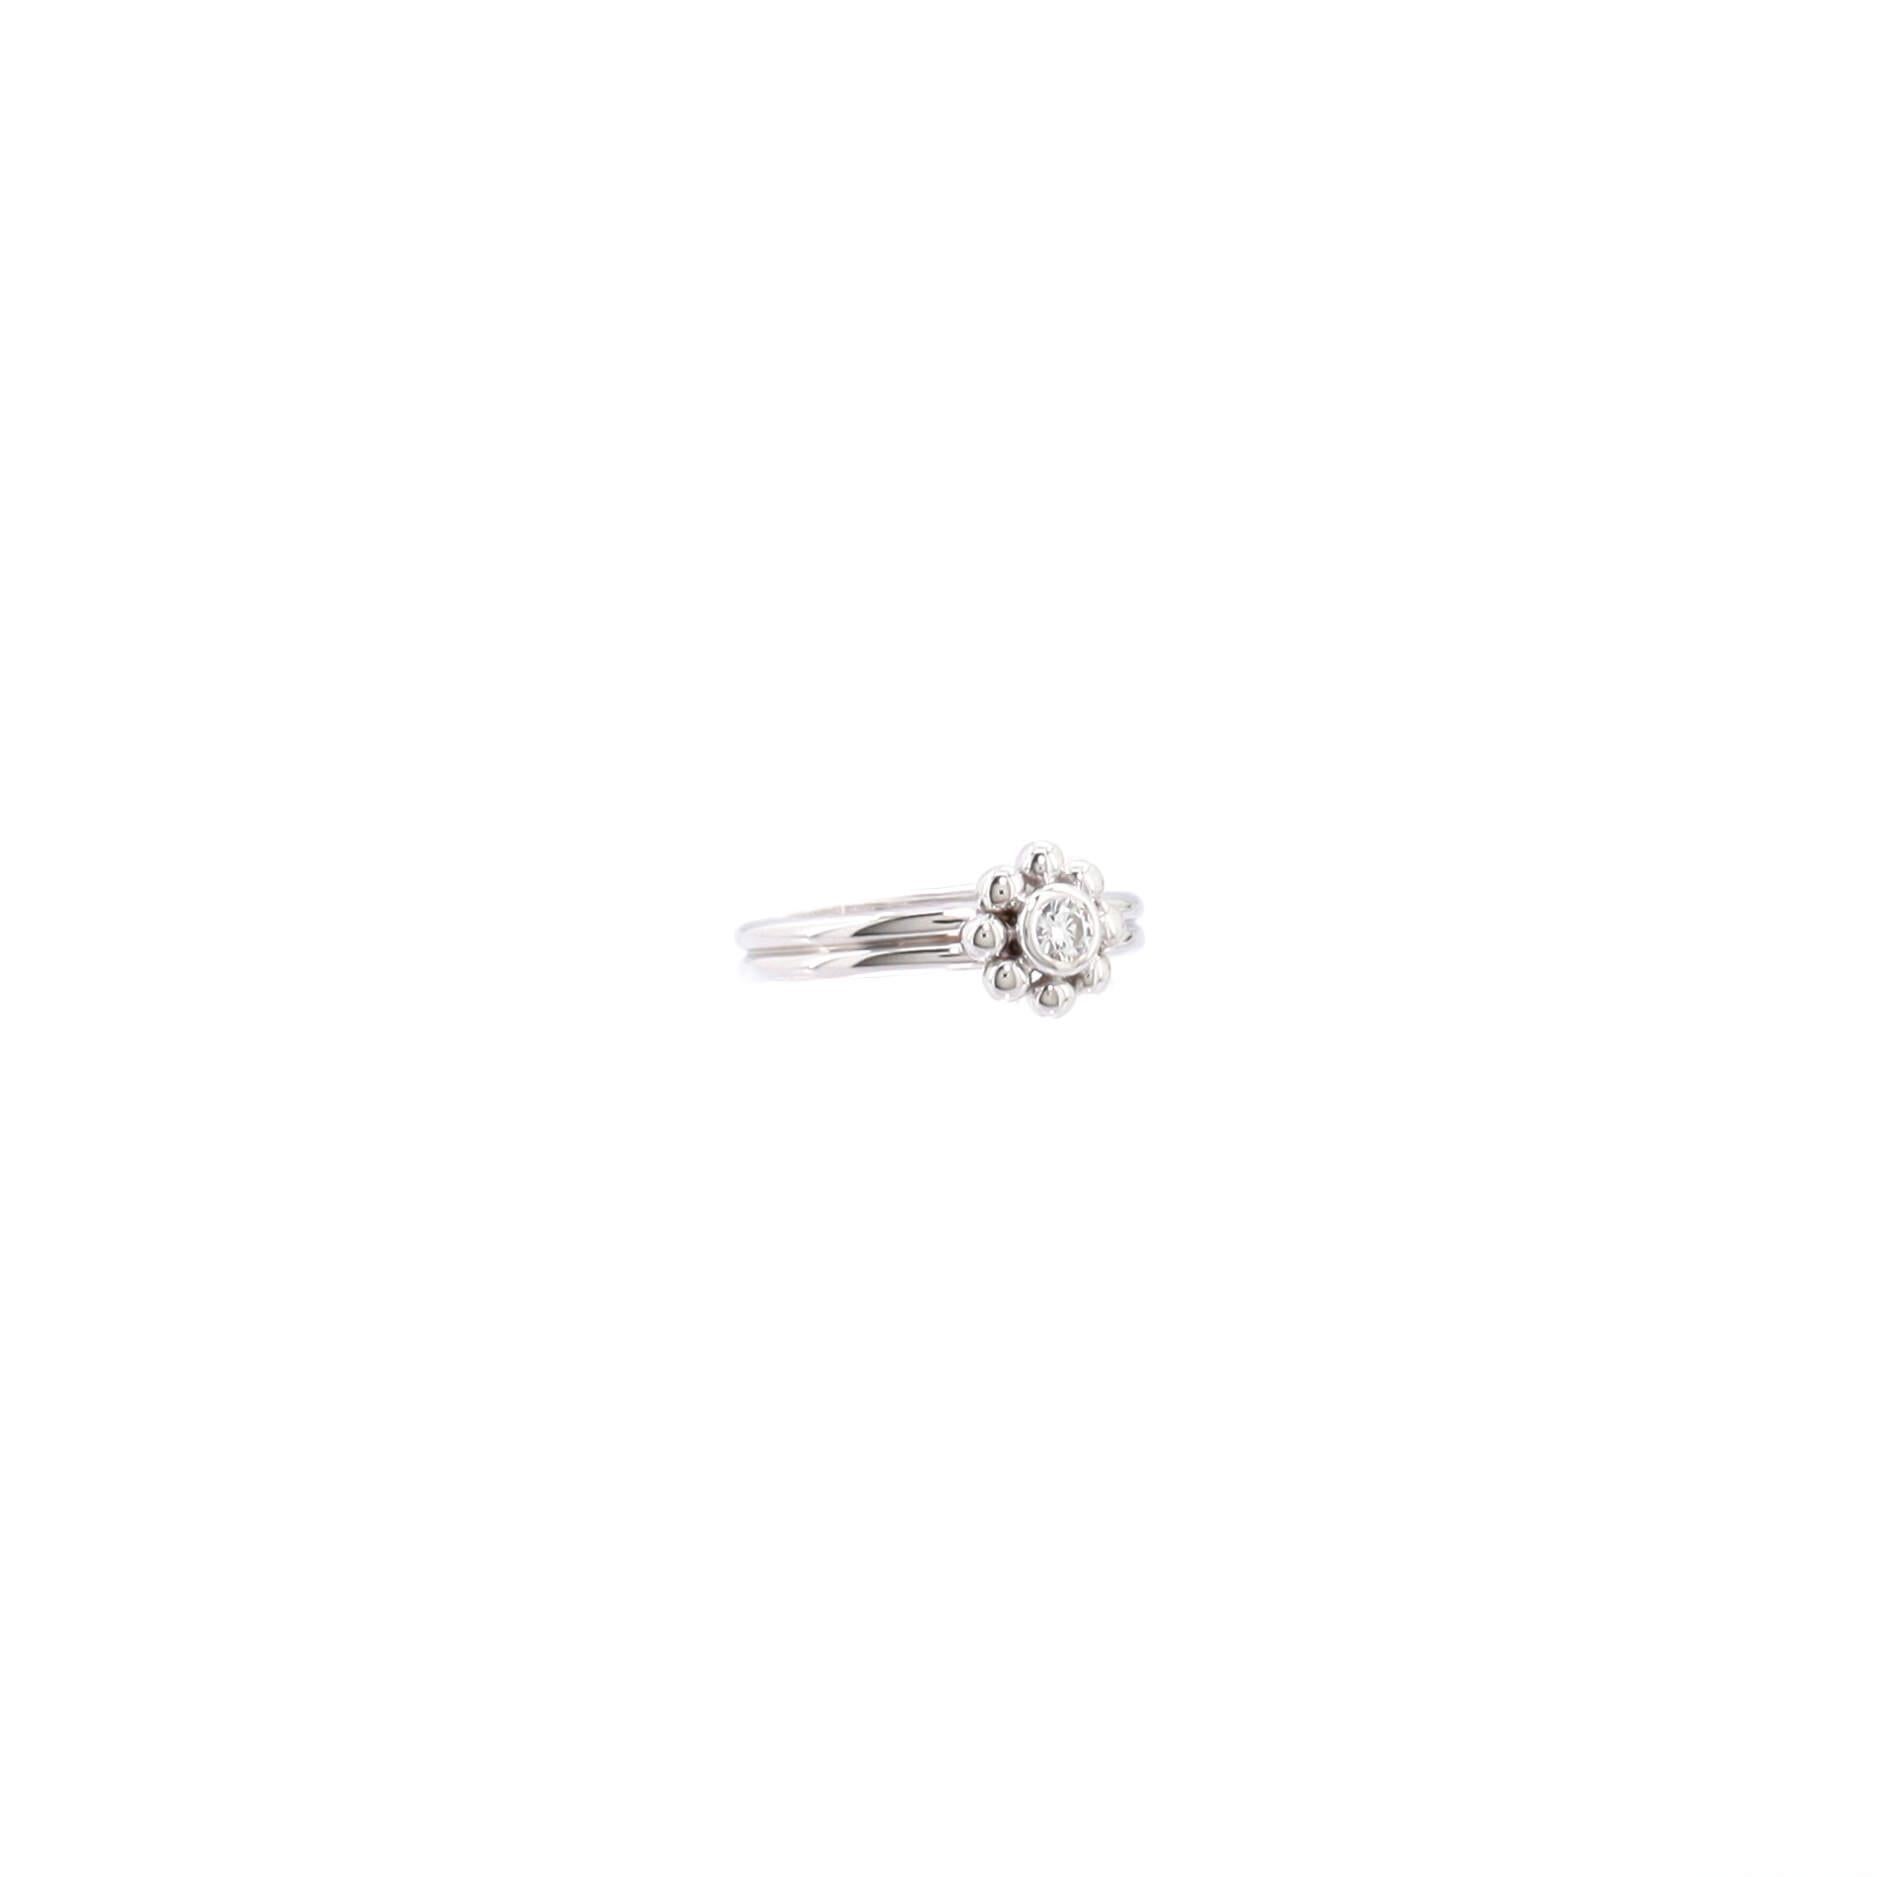 Condition: Great. Minor wear throughout.
Accessories: No Accessories
Measurements: Size: 5.25 - 50, Width: 3.10 mm
Designer: Tiffany & Co.
Model: Paloma Picasso Jolie Flower Ring 18K White Gold with Diamond
Exterior Color: White Gold
Item Number: